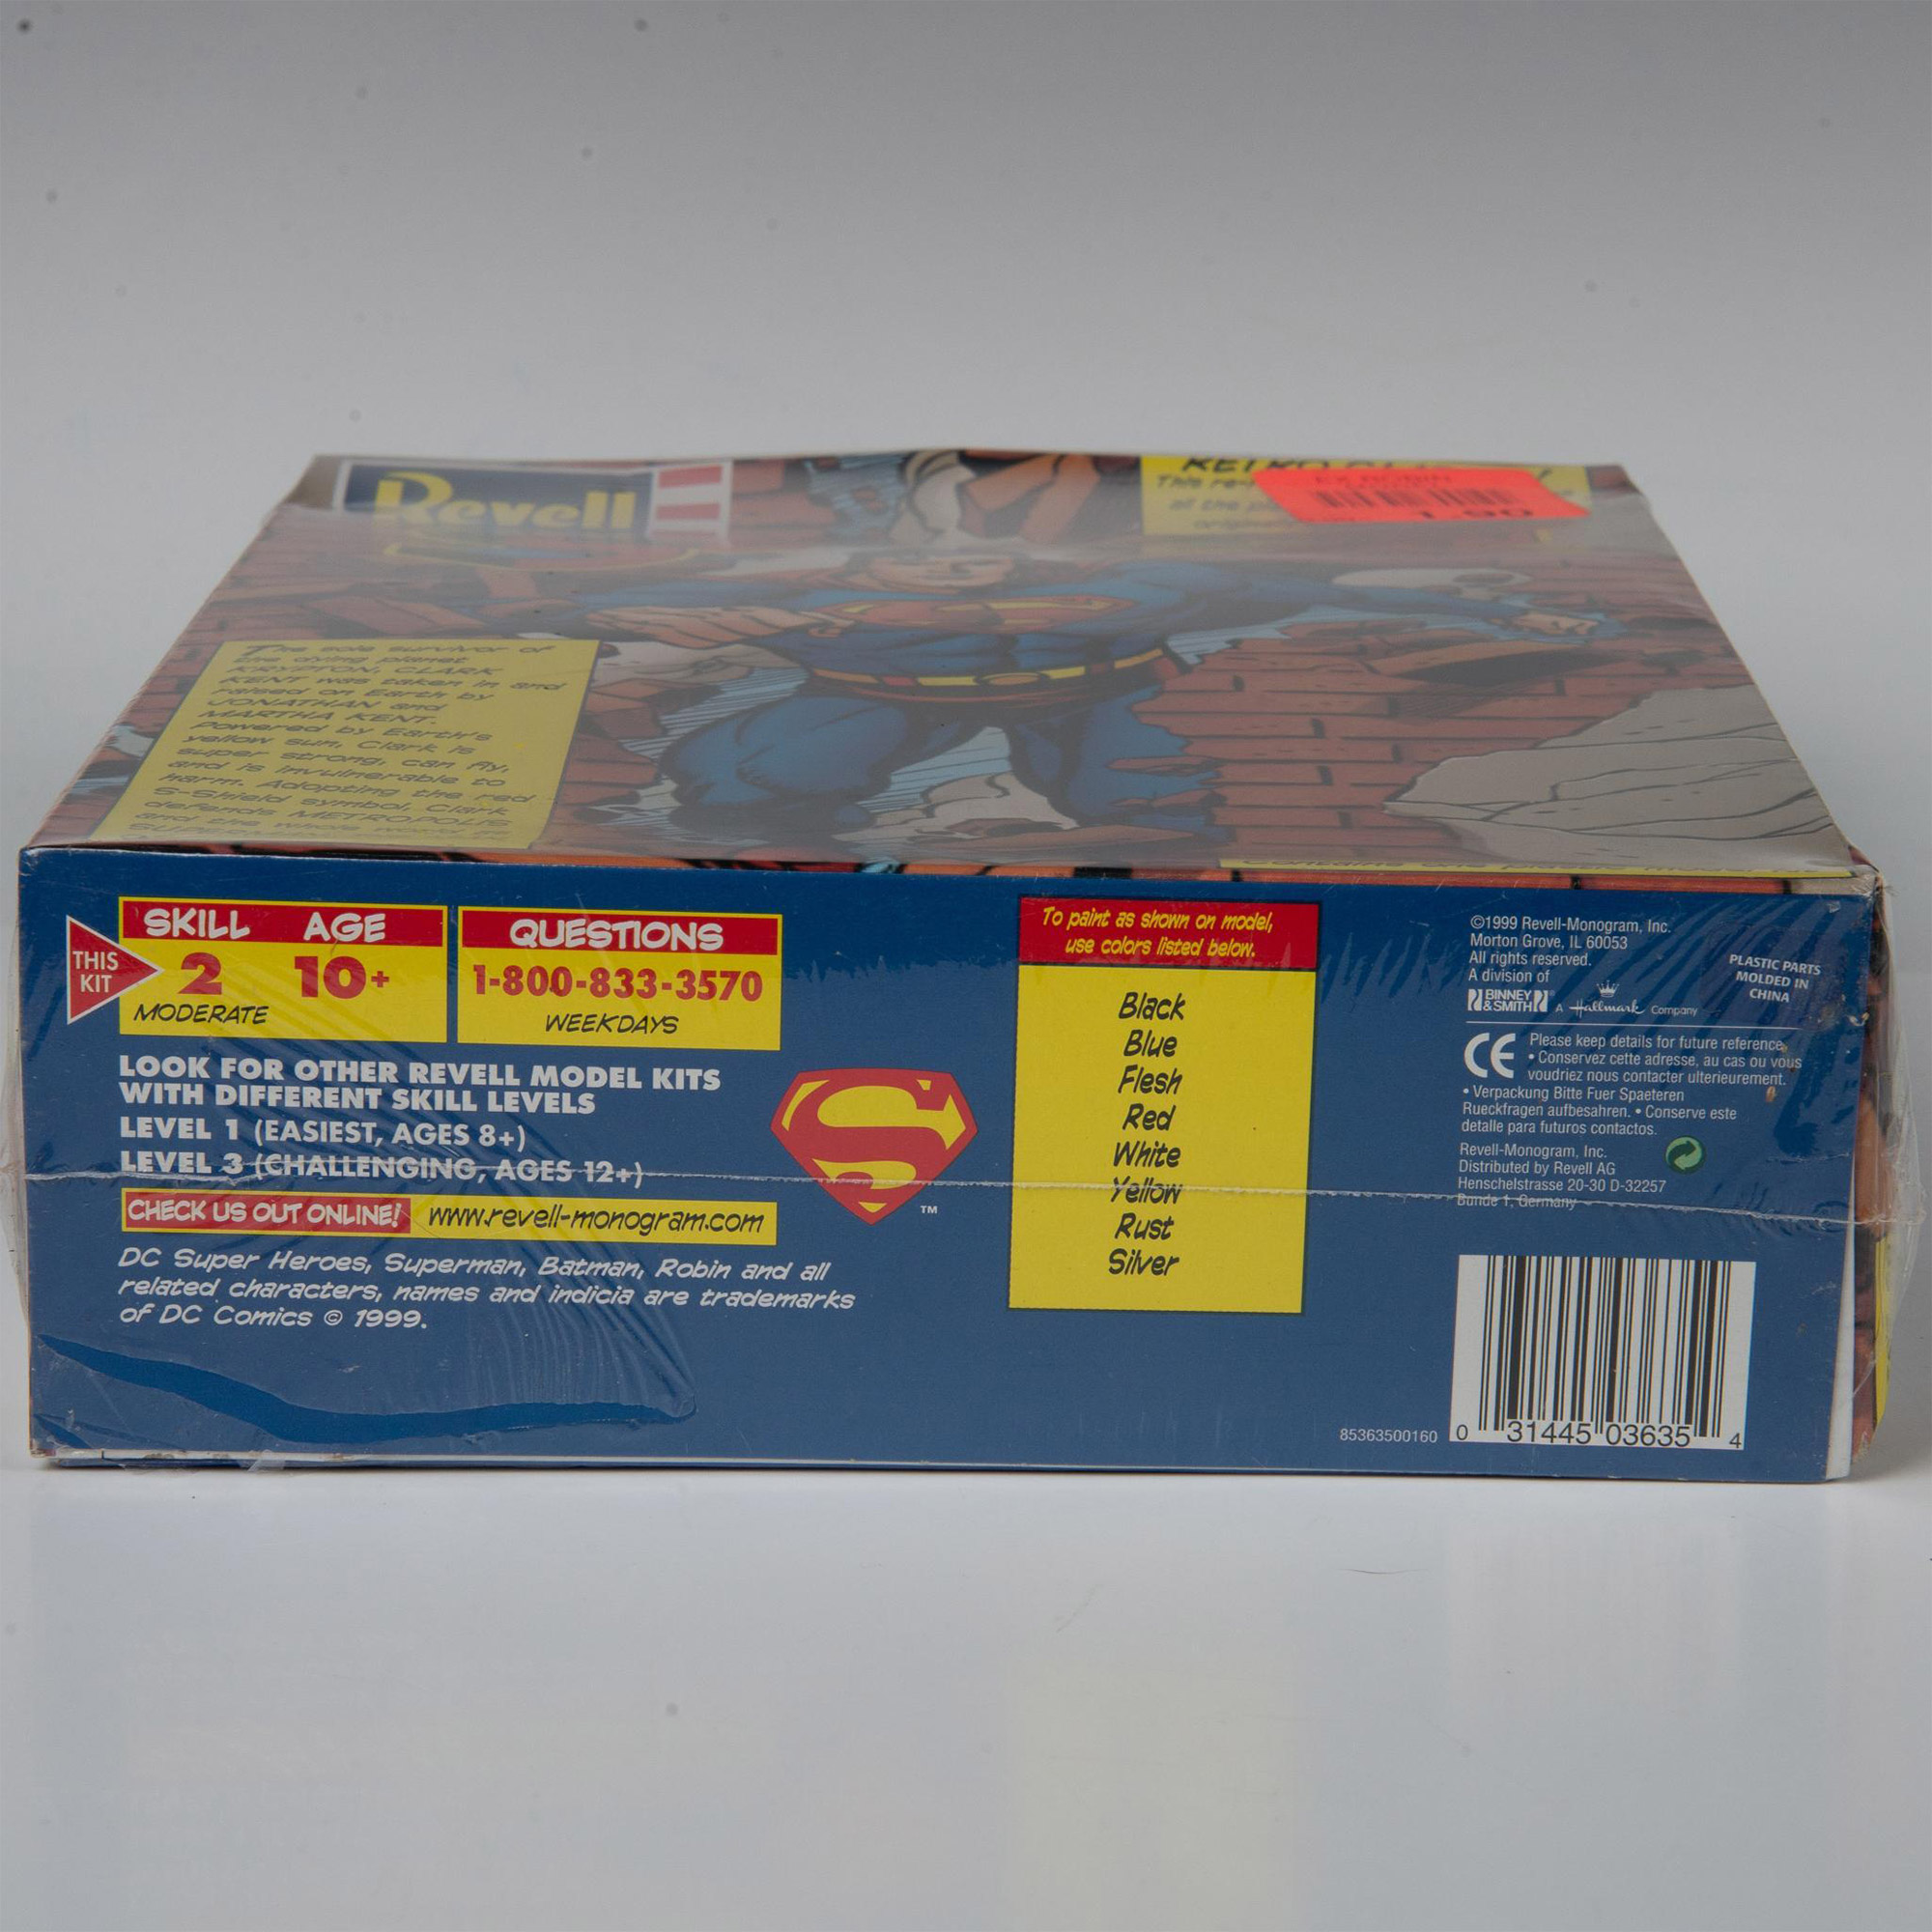 Revell Superman Model Kit by MPC #85-3635 - Image 5 of 6